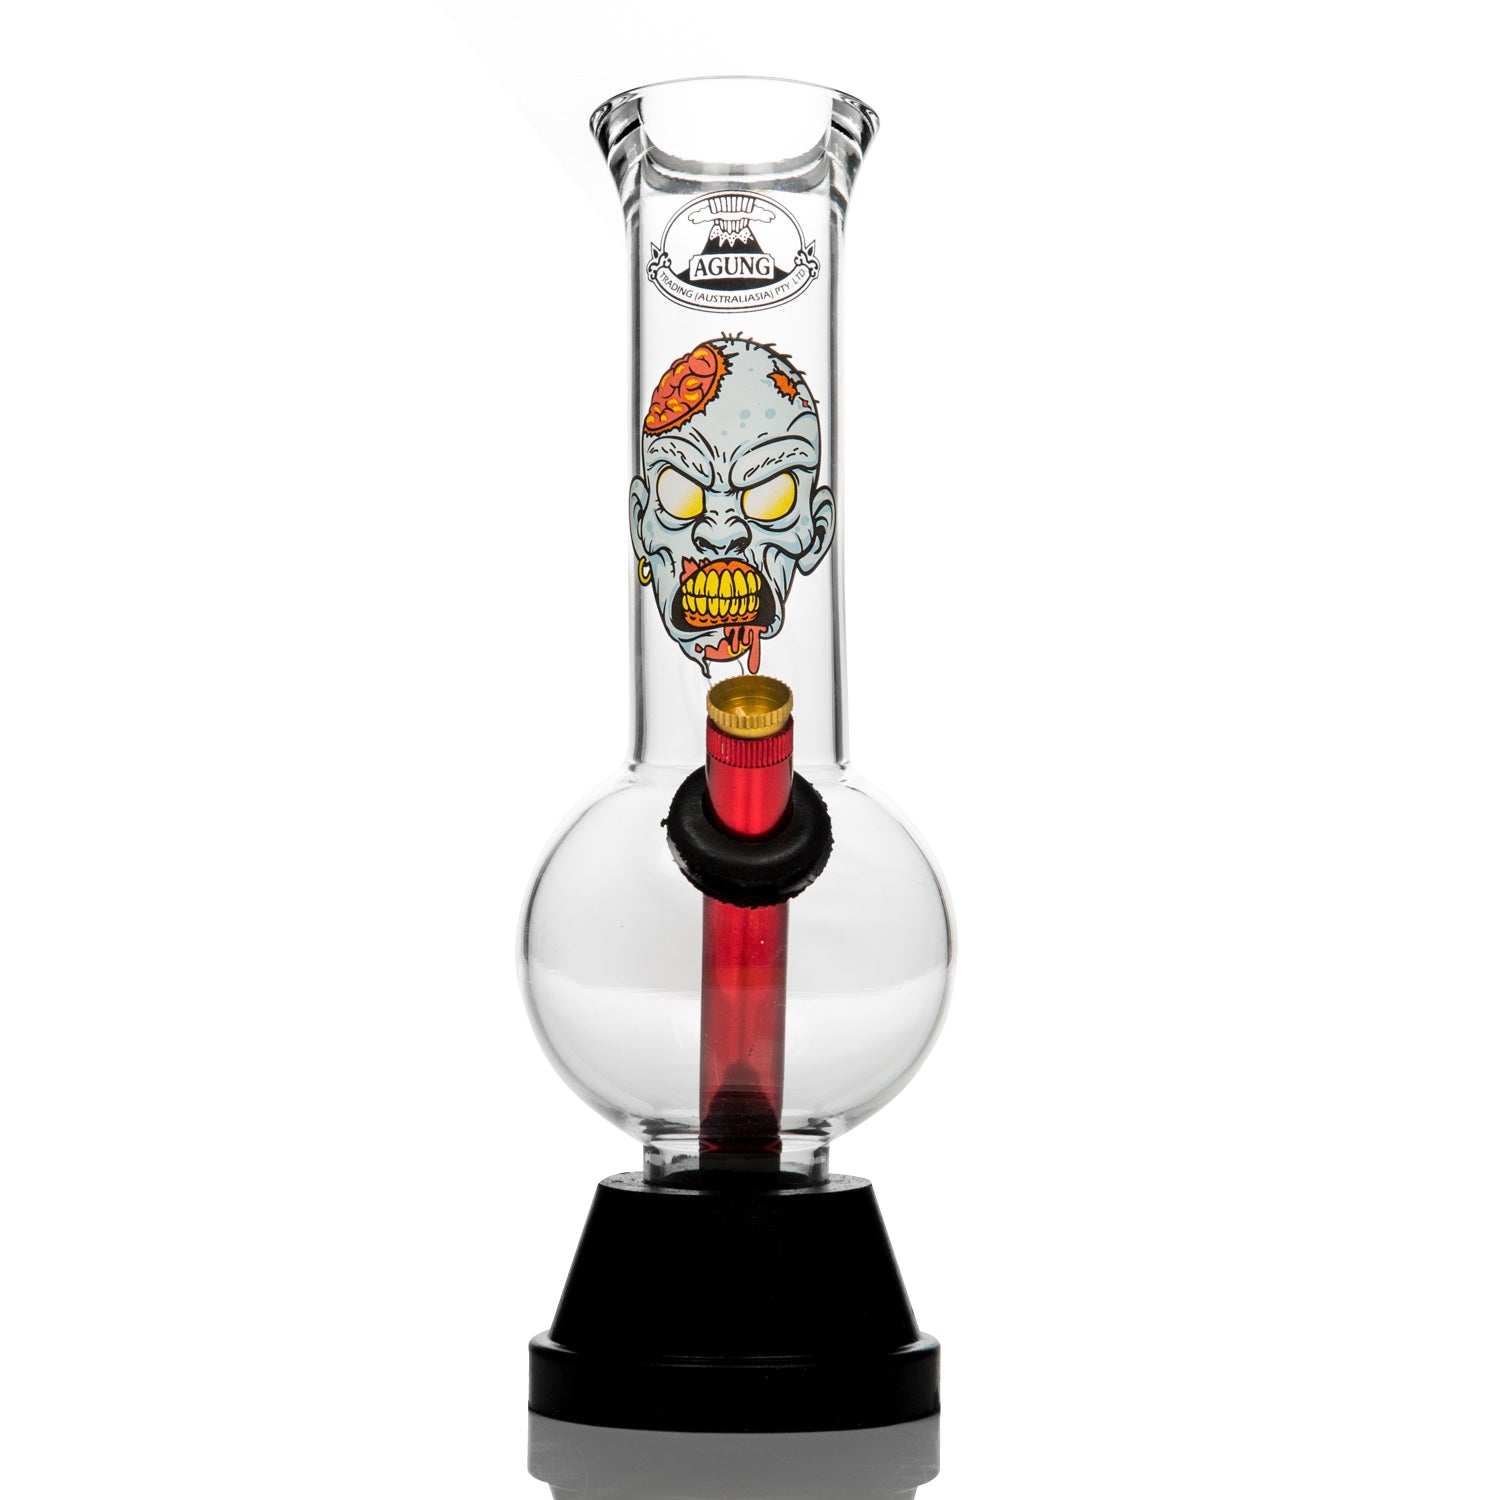 Medium sized Agung bong with zombie decal on the neck.